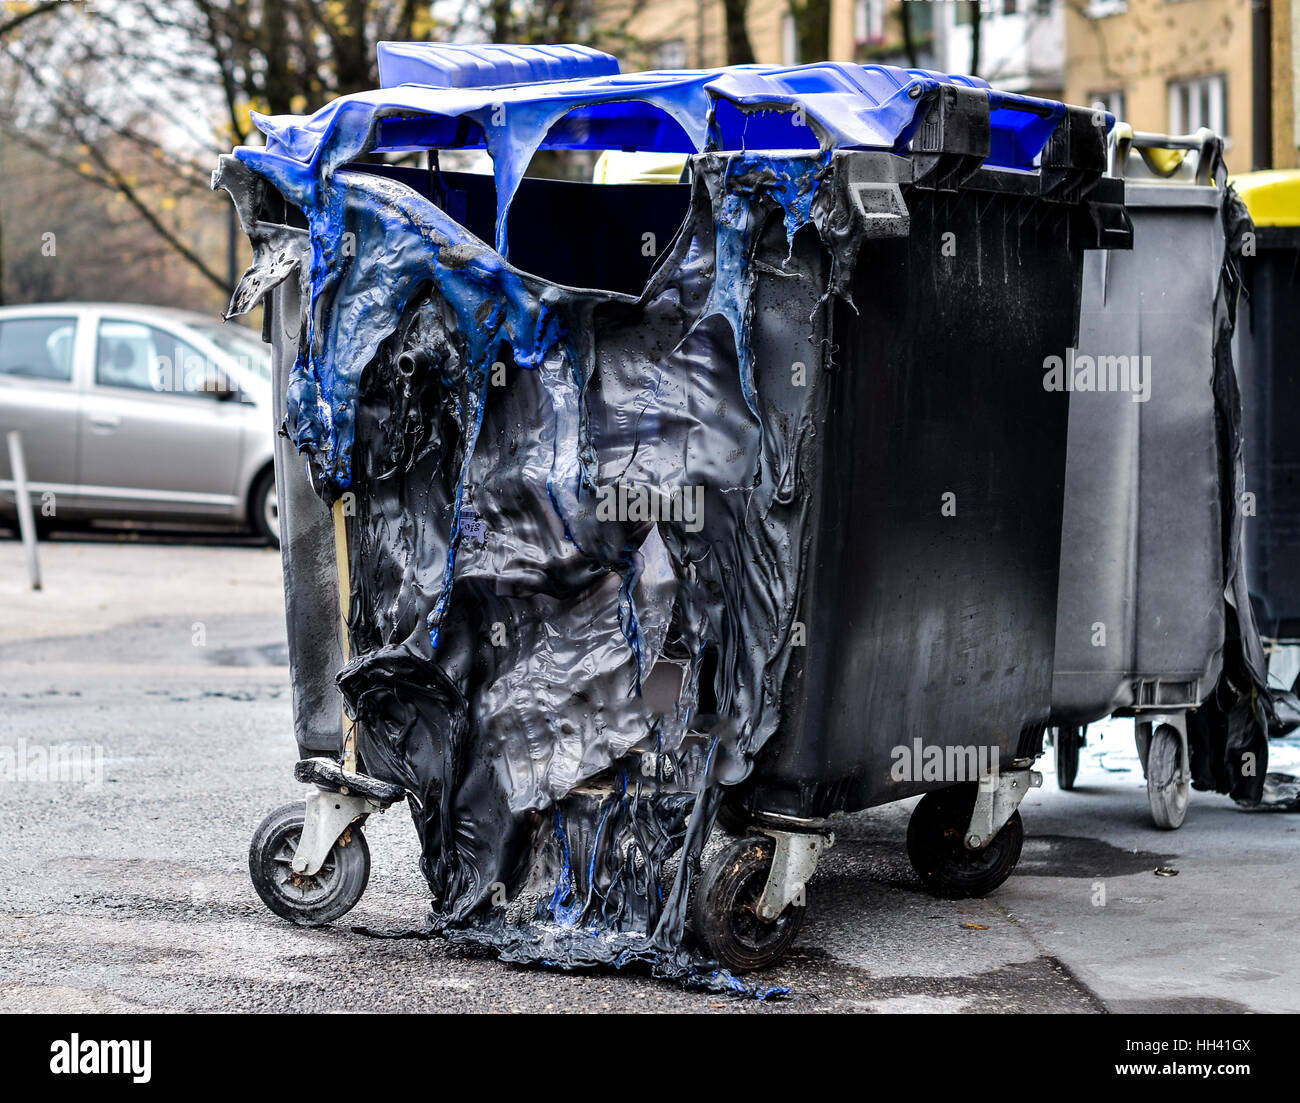 Burnt and melted trash can from fire. Burned trash in waste container in the city is melted due to hot fire inside. Stock Photo